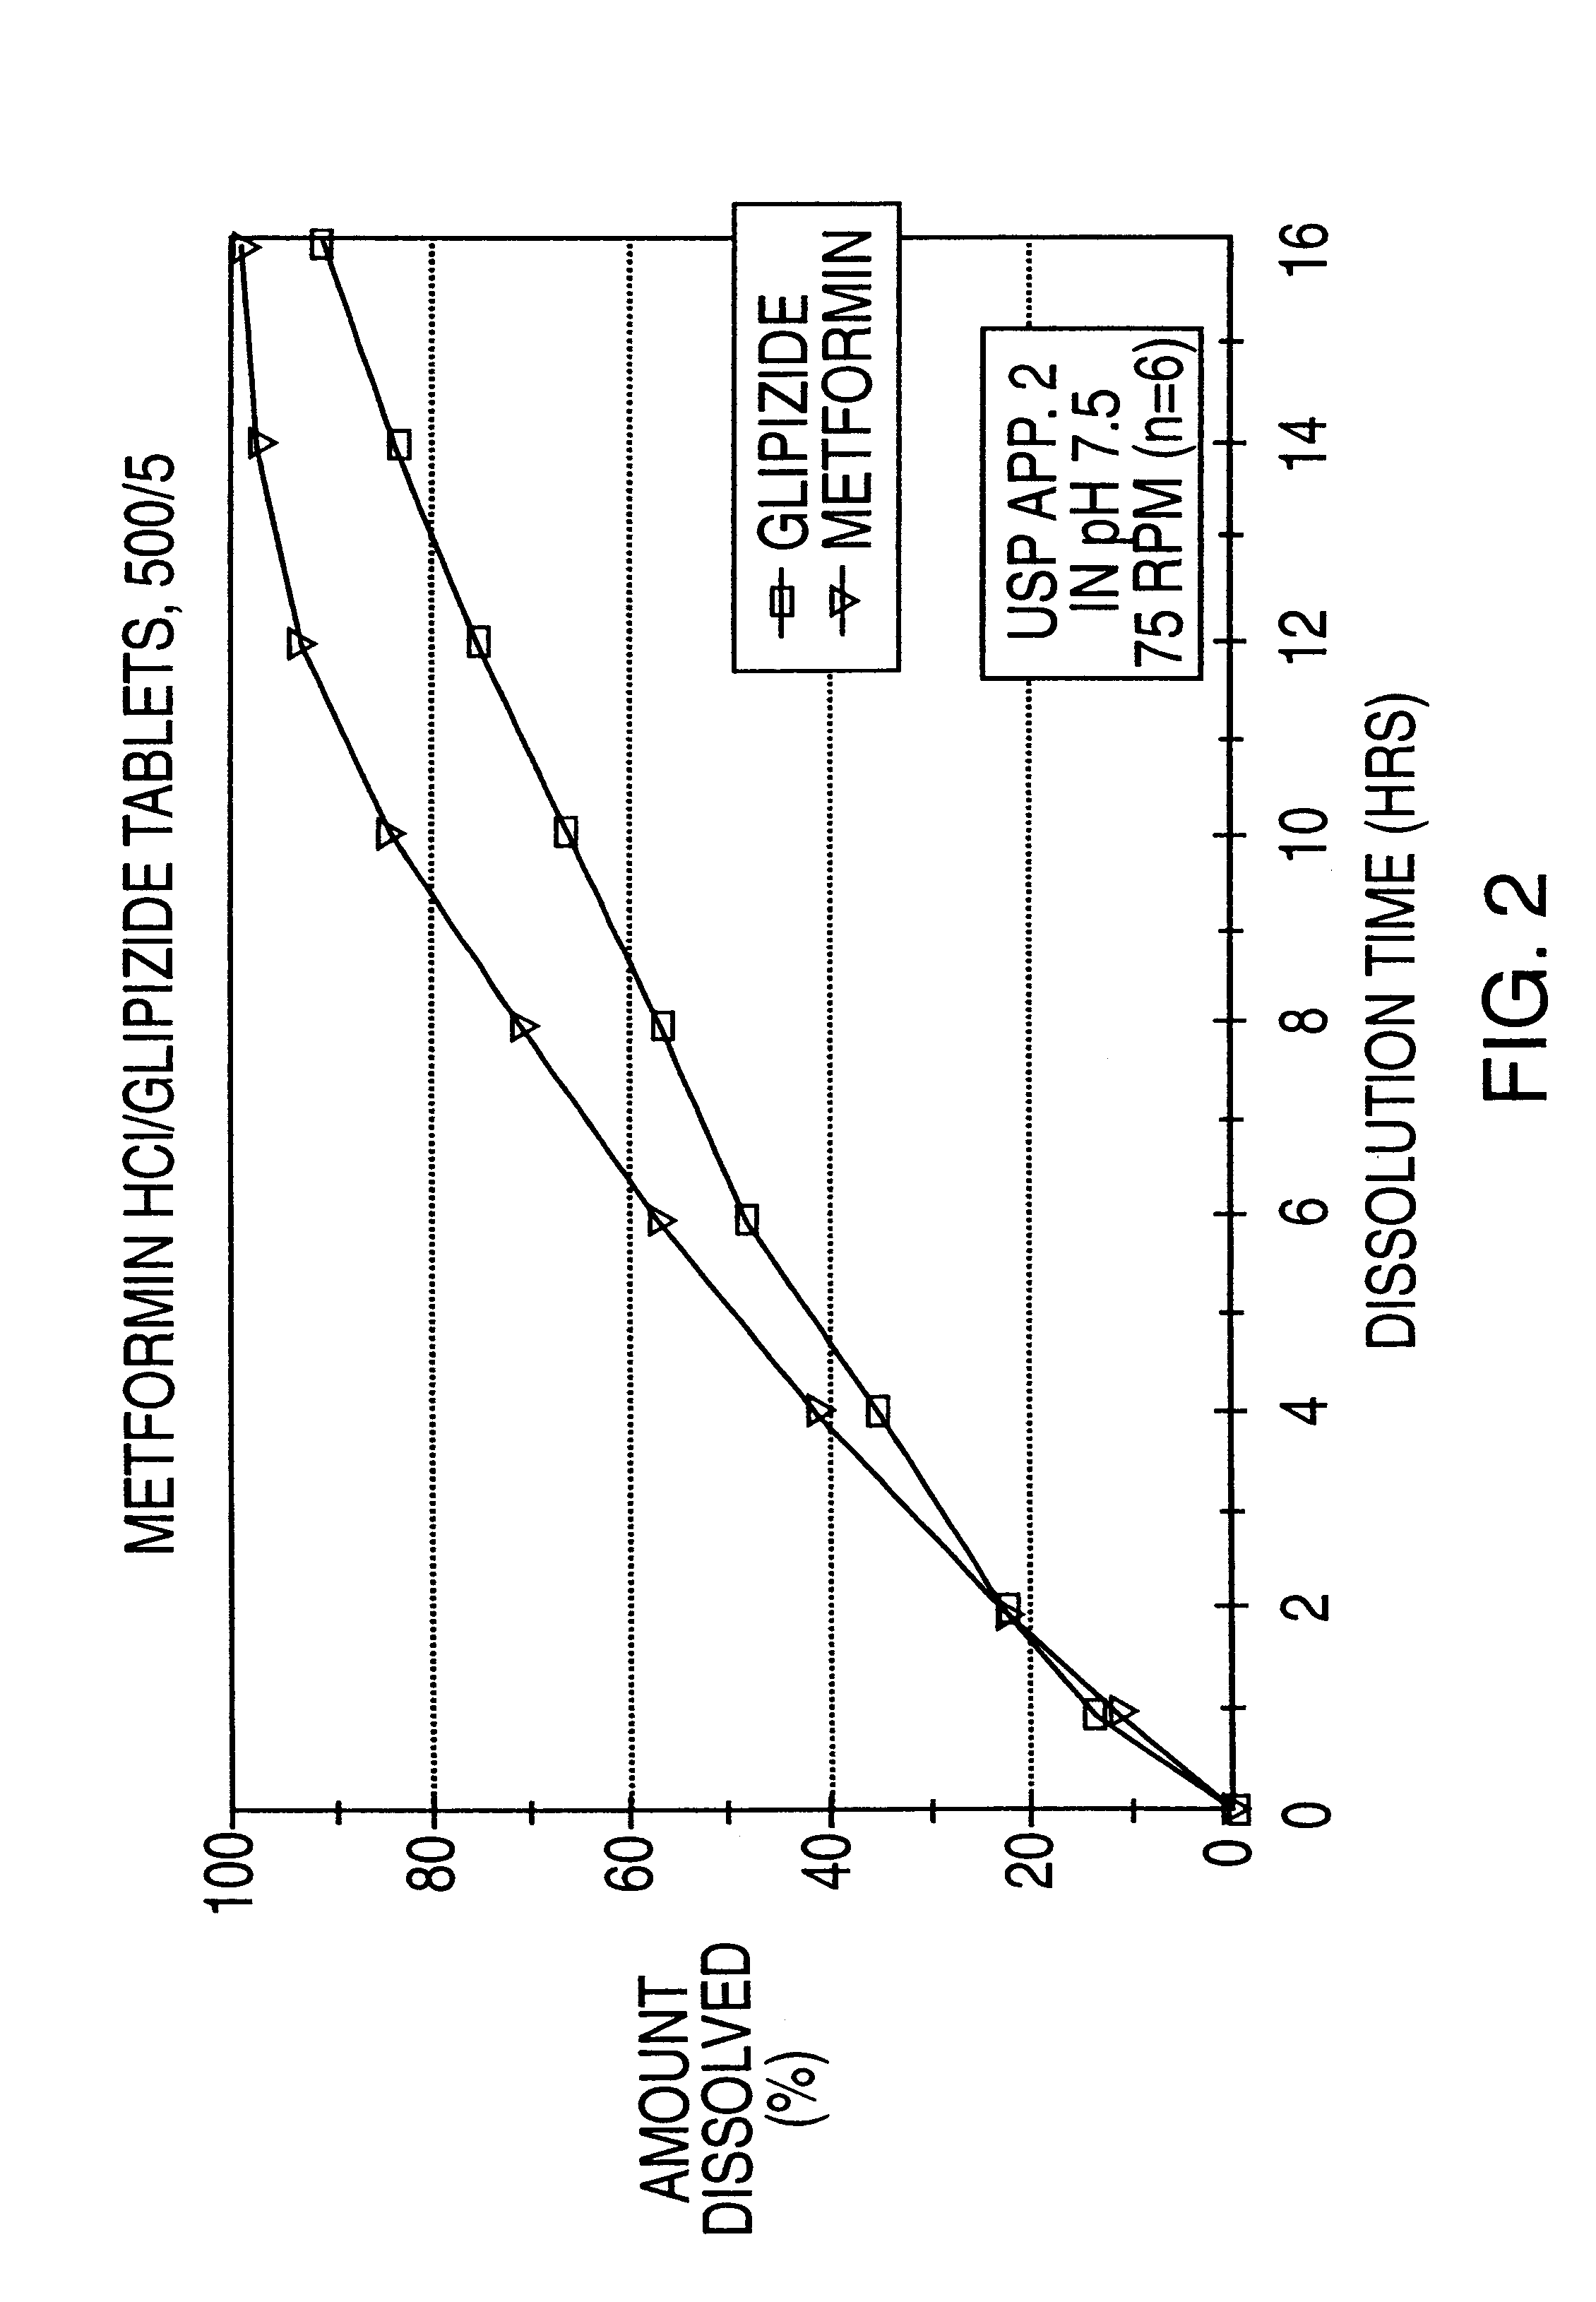 Controlled release tablet having a unitary core